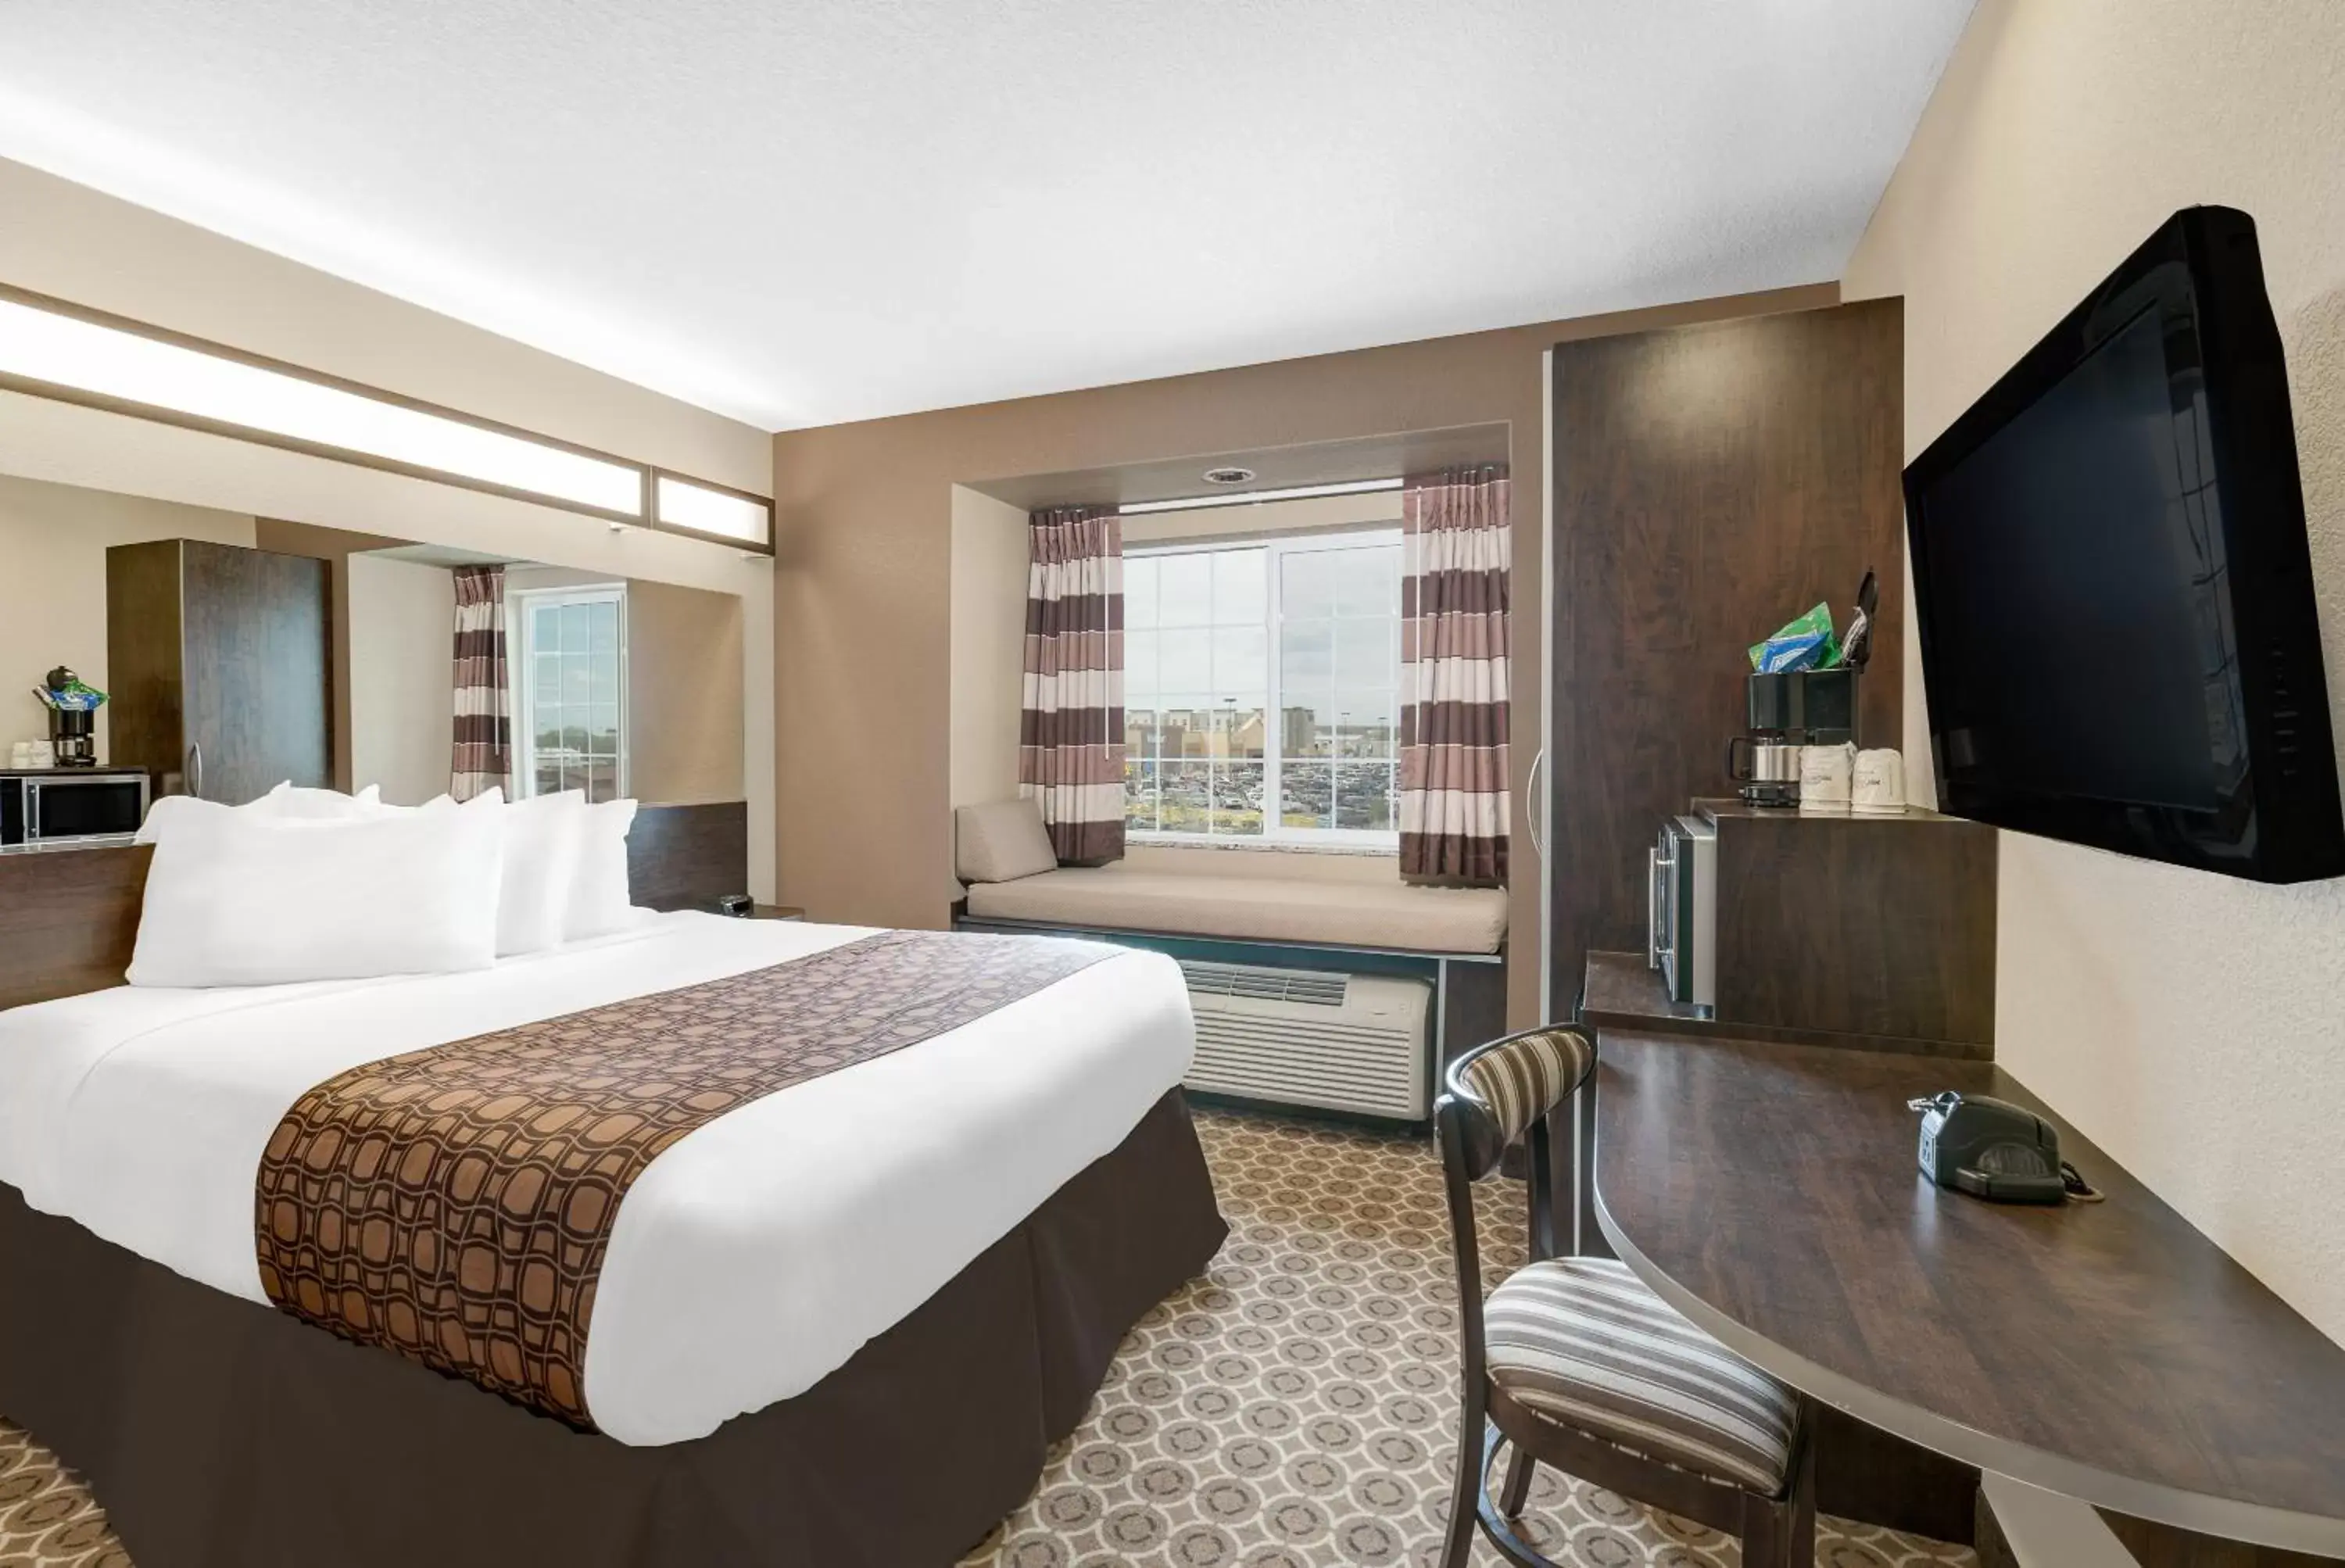 Day, Room Photo in Microtel Inn & Suites by Wyndham Williston